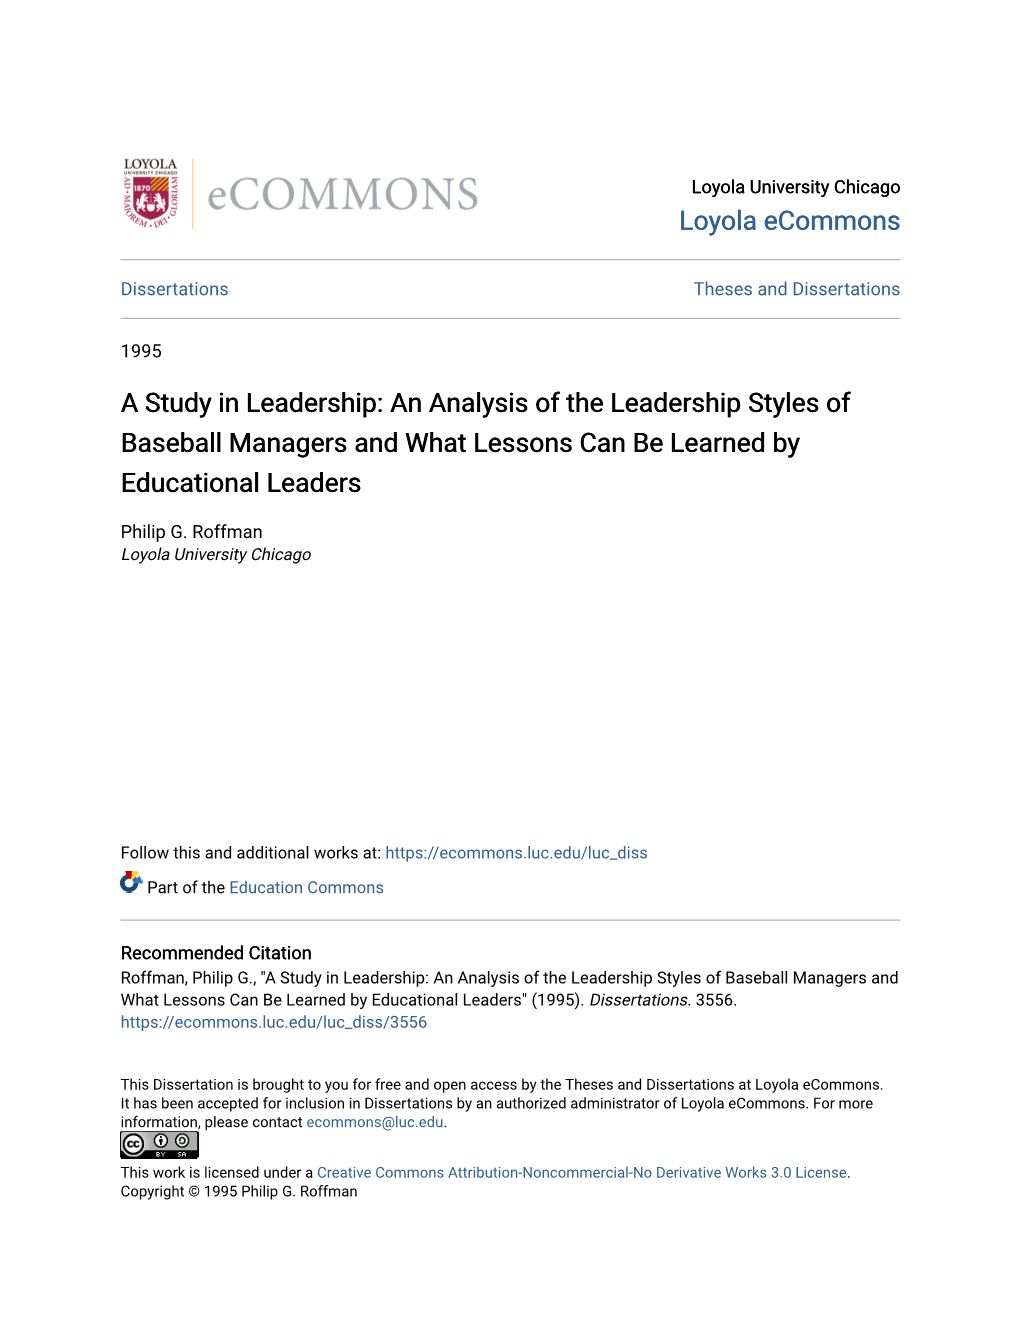 An Analysis of the Leadership Styles of Baseball Managers and What Lessons Can Be Learned by Educational Leaders